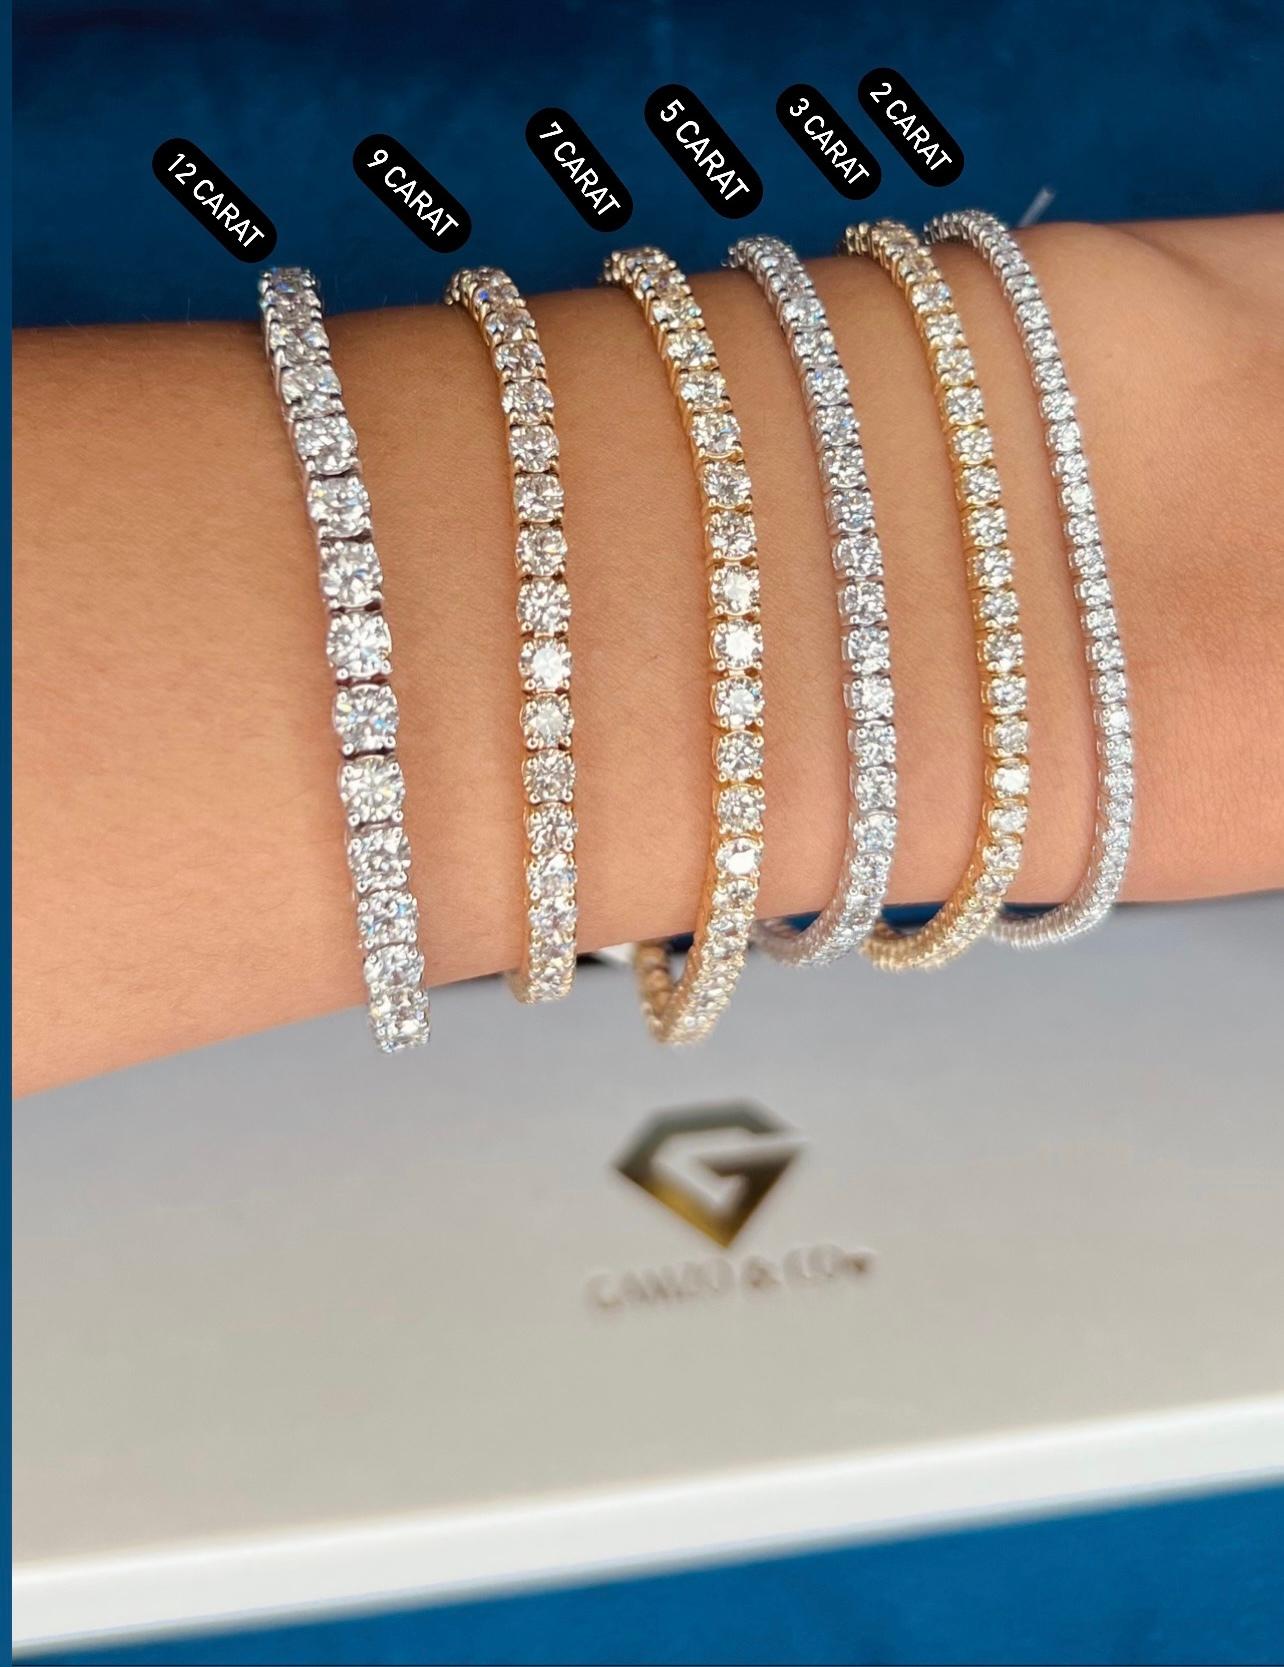 This diamond tennis bracelet features beautifully cut round diamonds set gorgeously in 14k gold.

Metal: 14k Gold
Diamond Cut: Round Natural Diamond 
Total Diamond Carats: 7ct
Diamond Clarity: VS
Diamond Color: F-G
Color: Yellow Gold
Bracelet